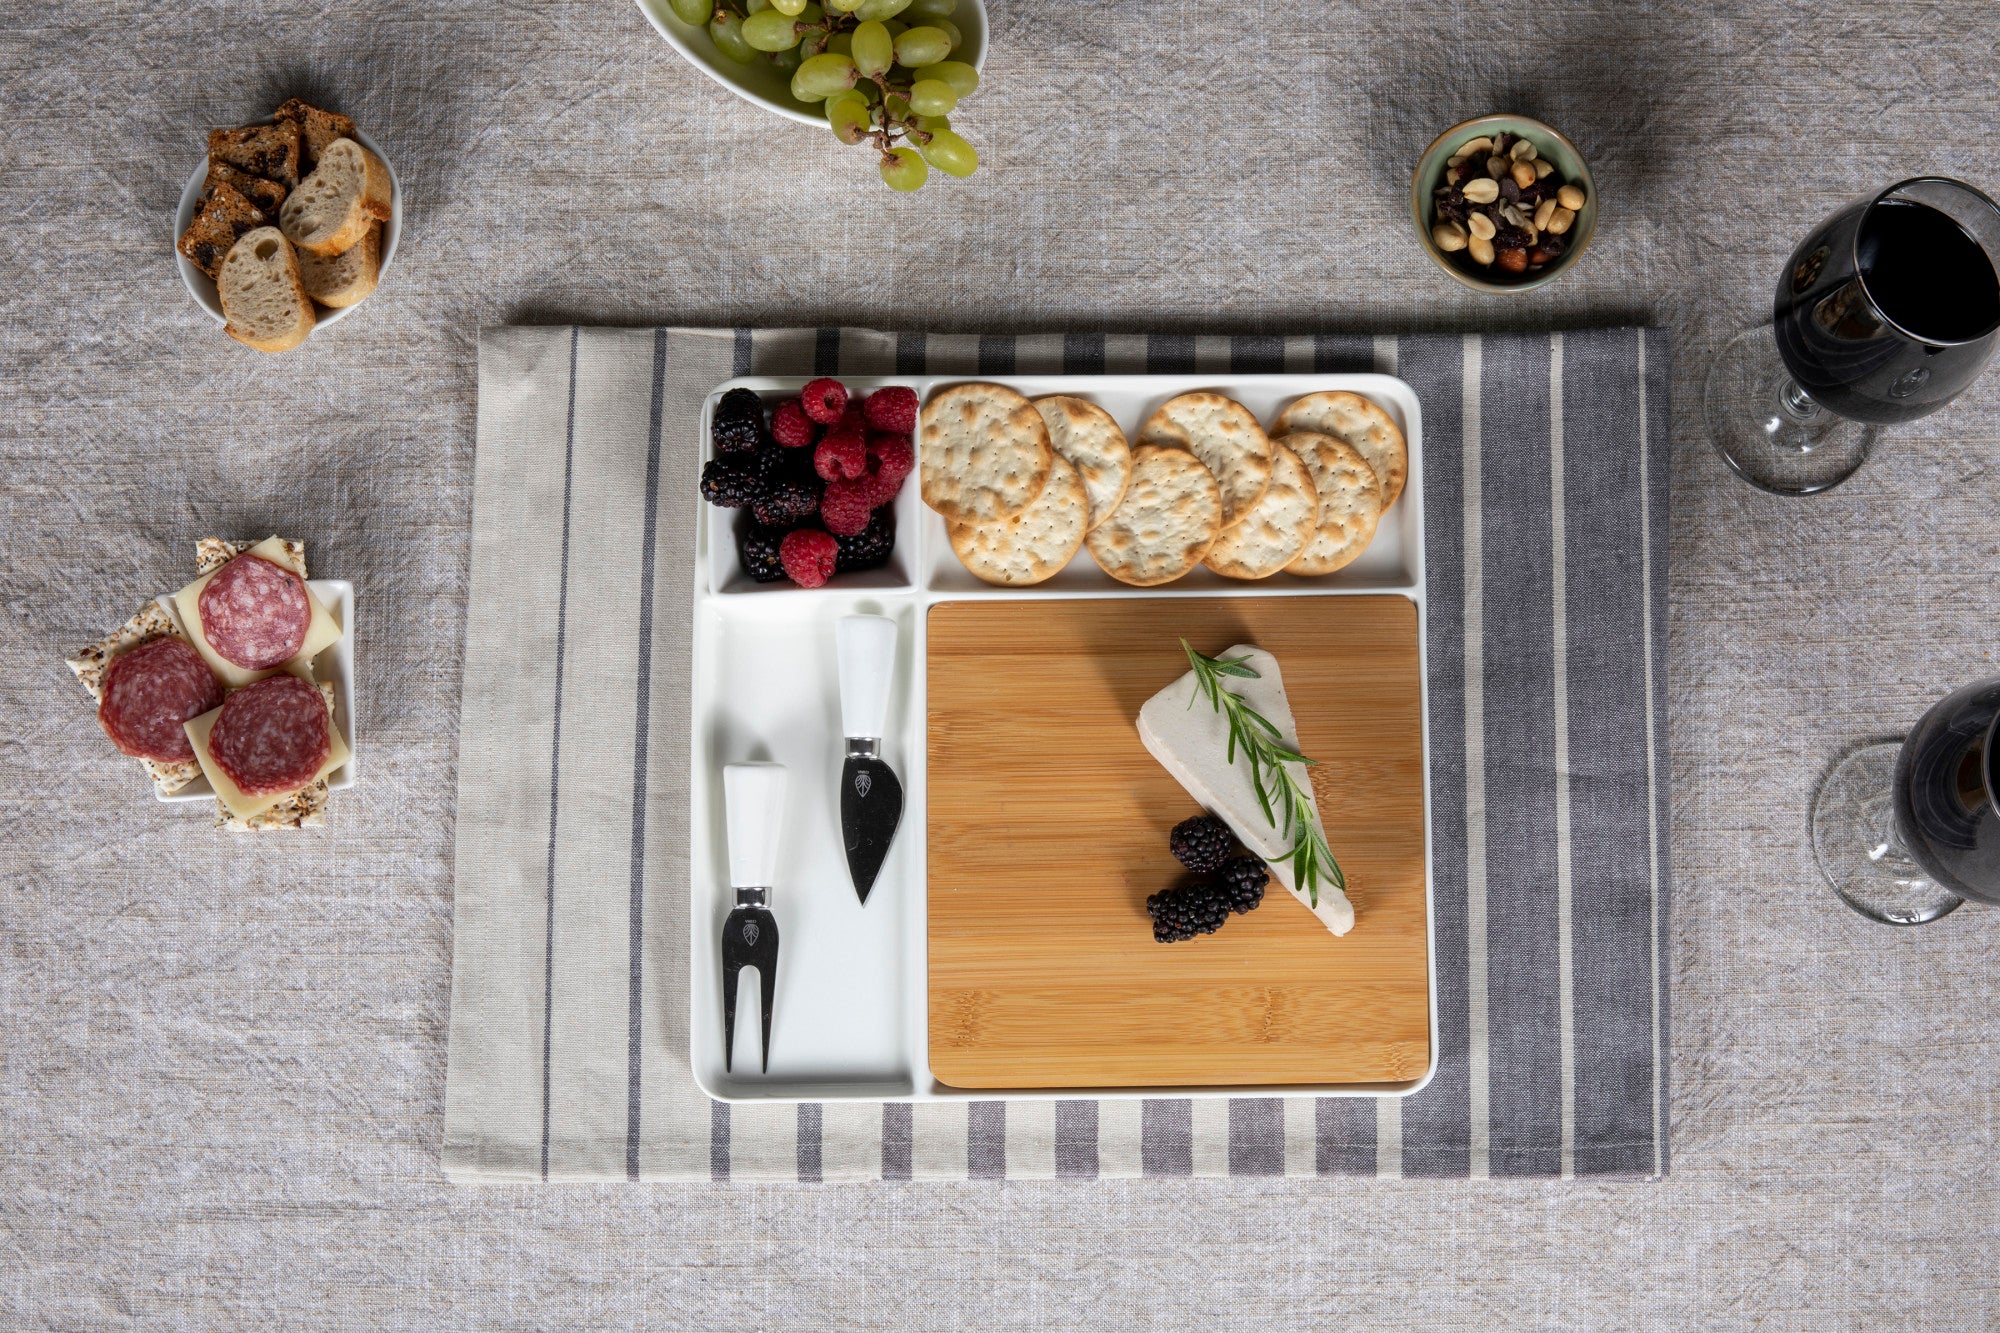 Tennessee Titans - Peninsula Cutting Board & Serving Tray